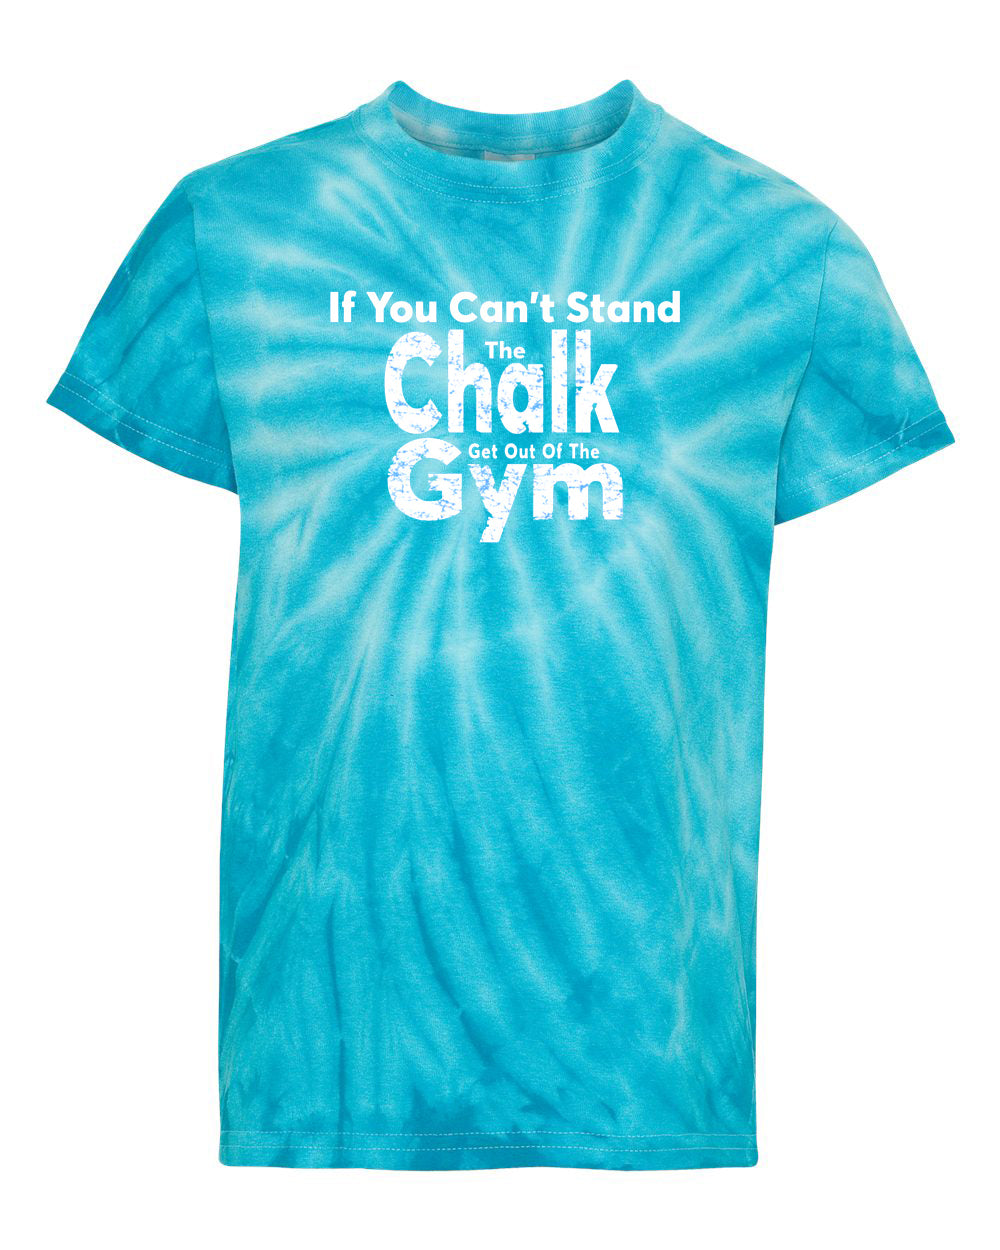 If You Can't Stand The Chalk Get Out Of The Gym Youth Tie Dye T-Shirt Turquoise